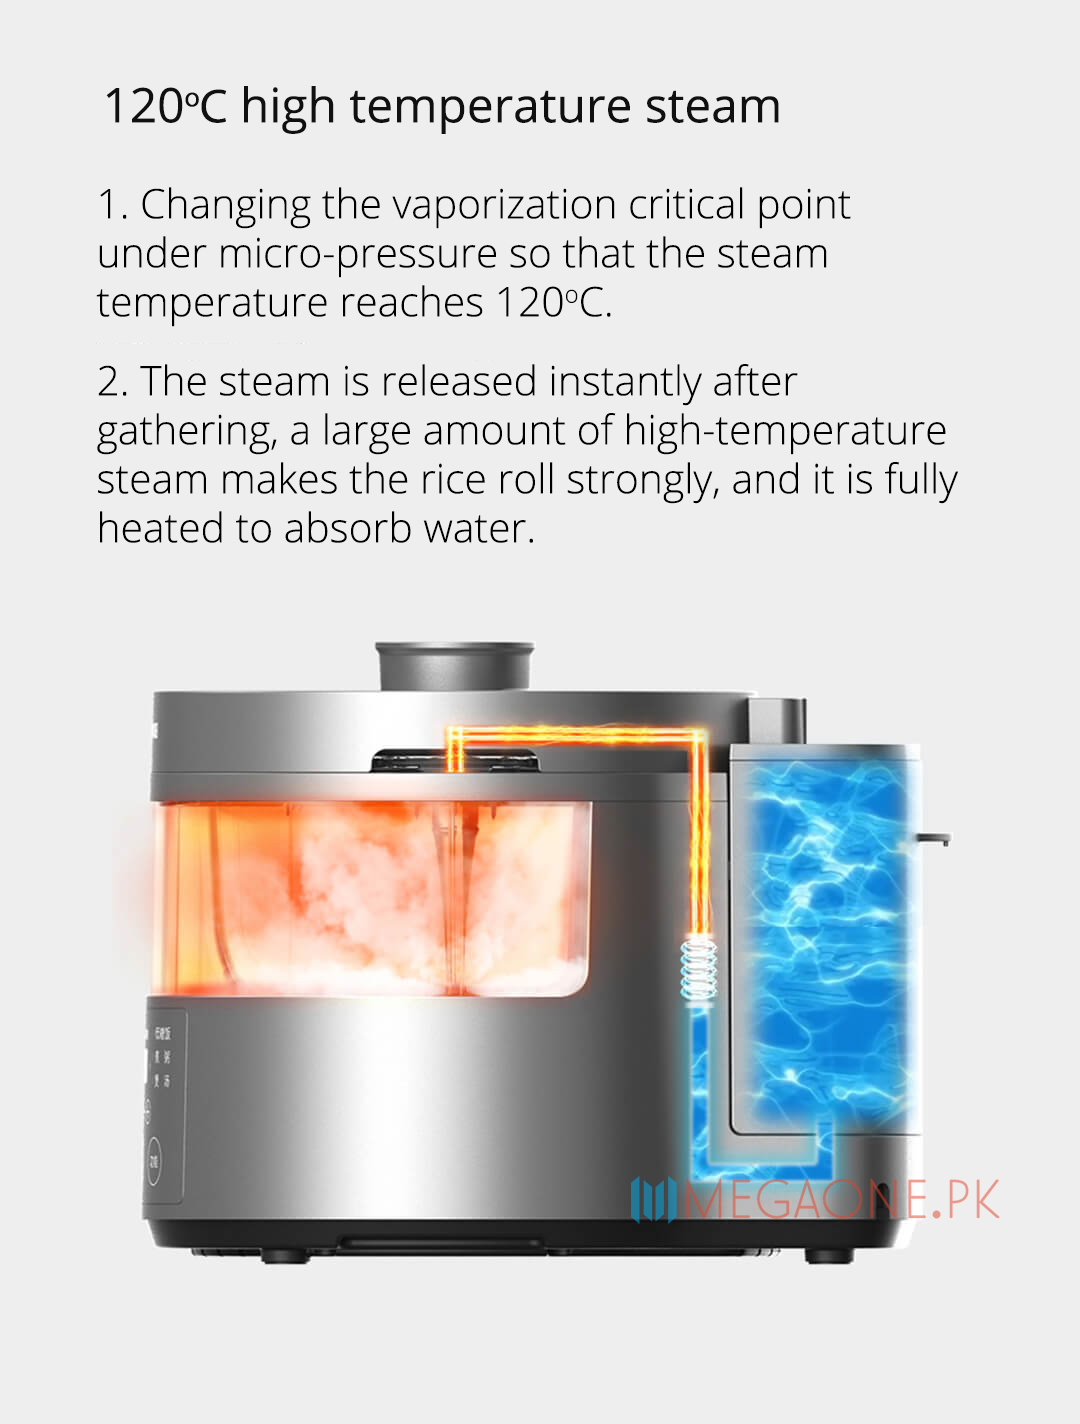 1. Changing the vaporization critical point under micro-pressure so that the steam temperature reaches 120oC. 2. The steam is released instantly after gathering, a large amount of high-temperature steam makes the rice roll strongly, and it is fully heated to absorb water.